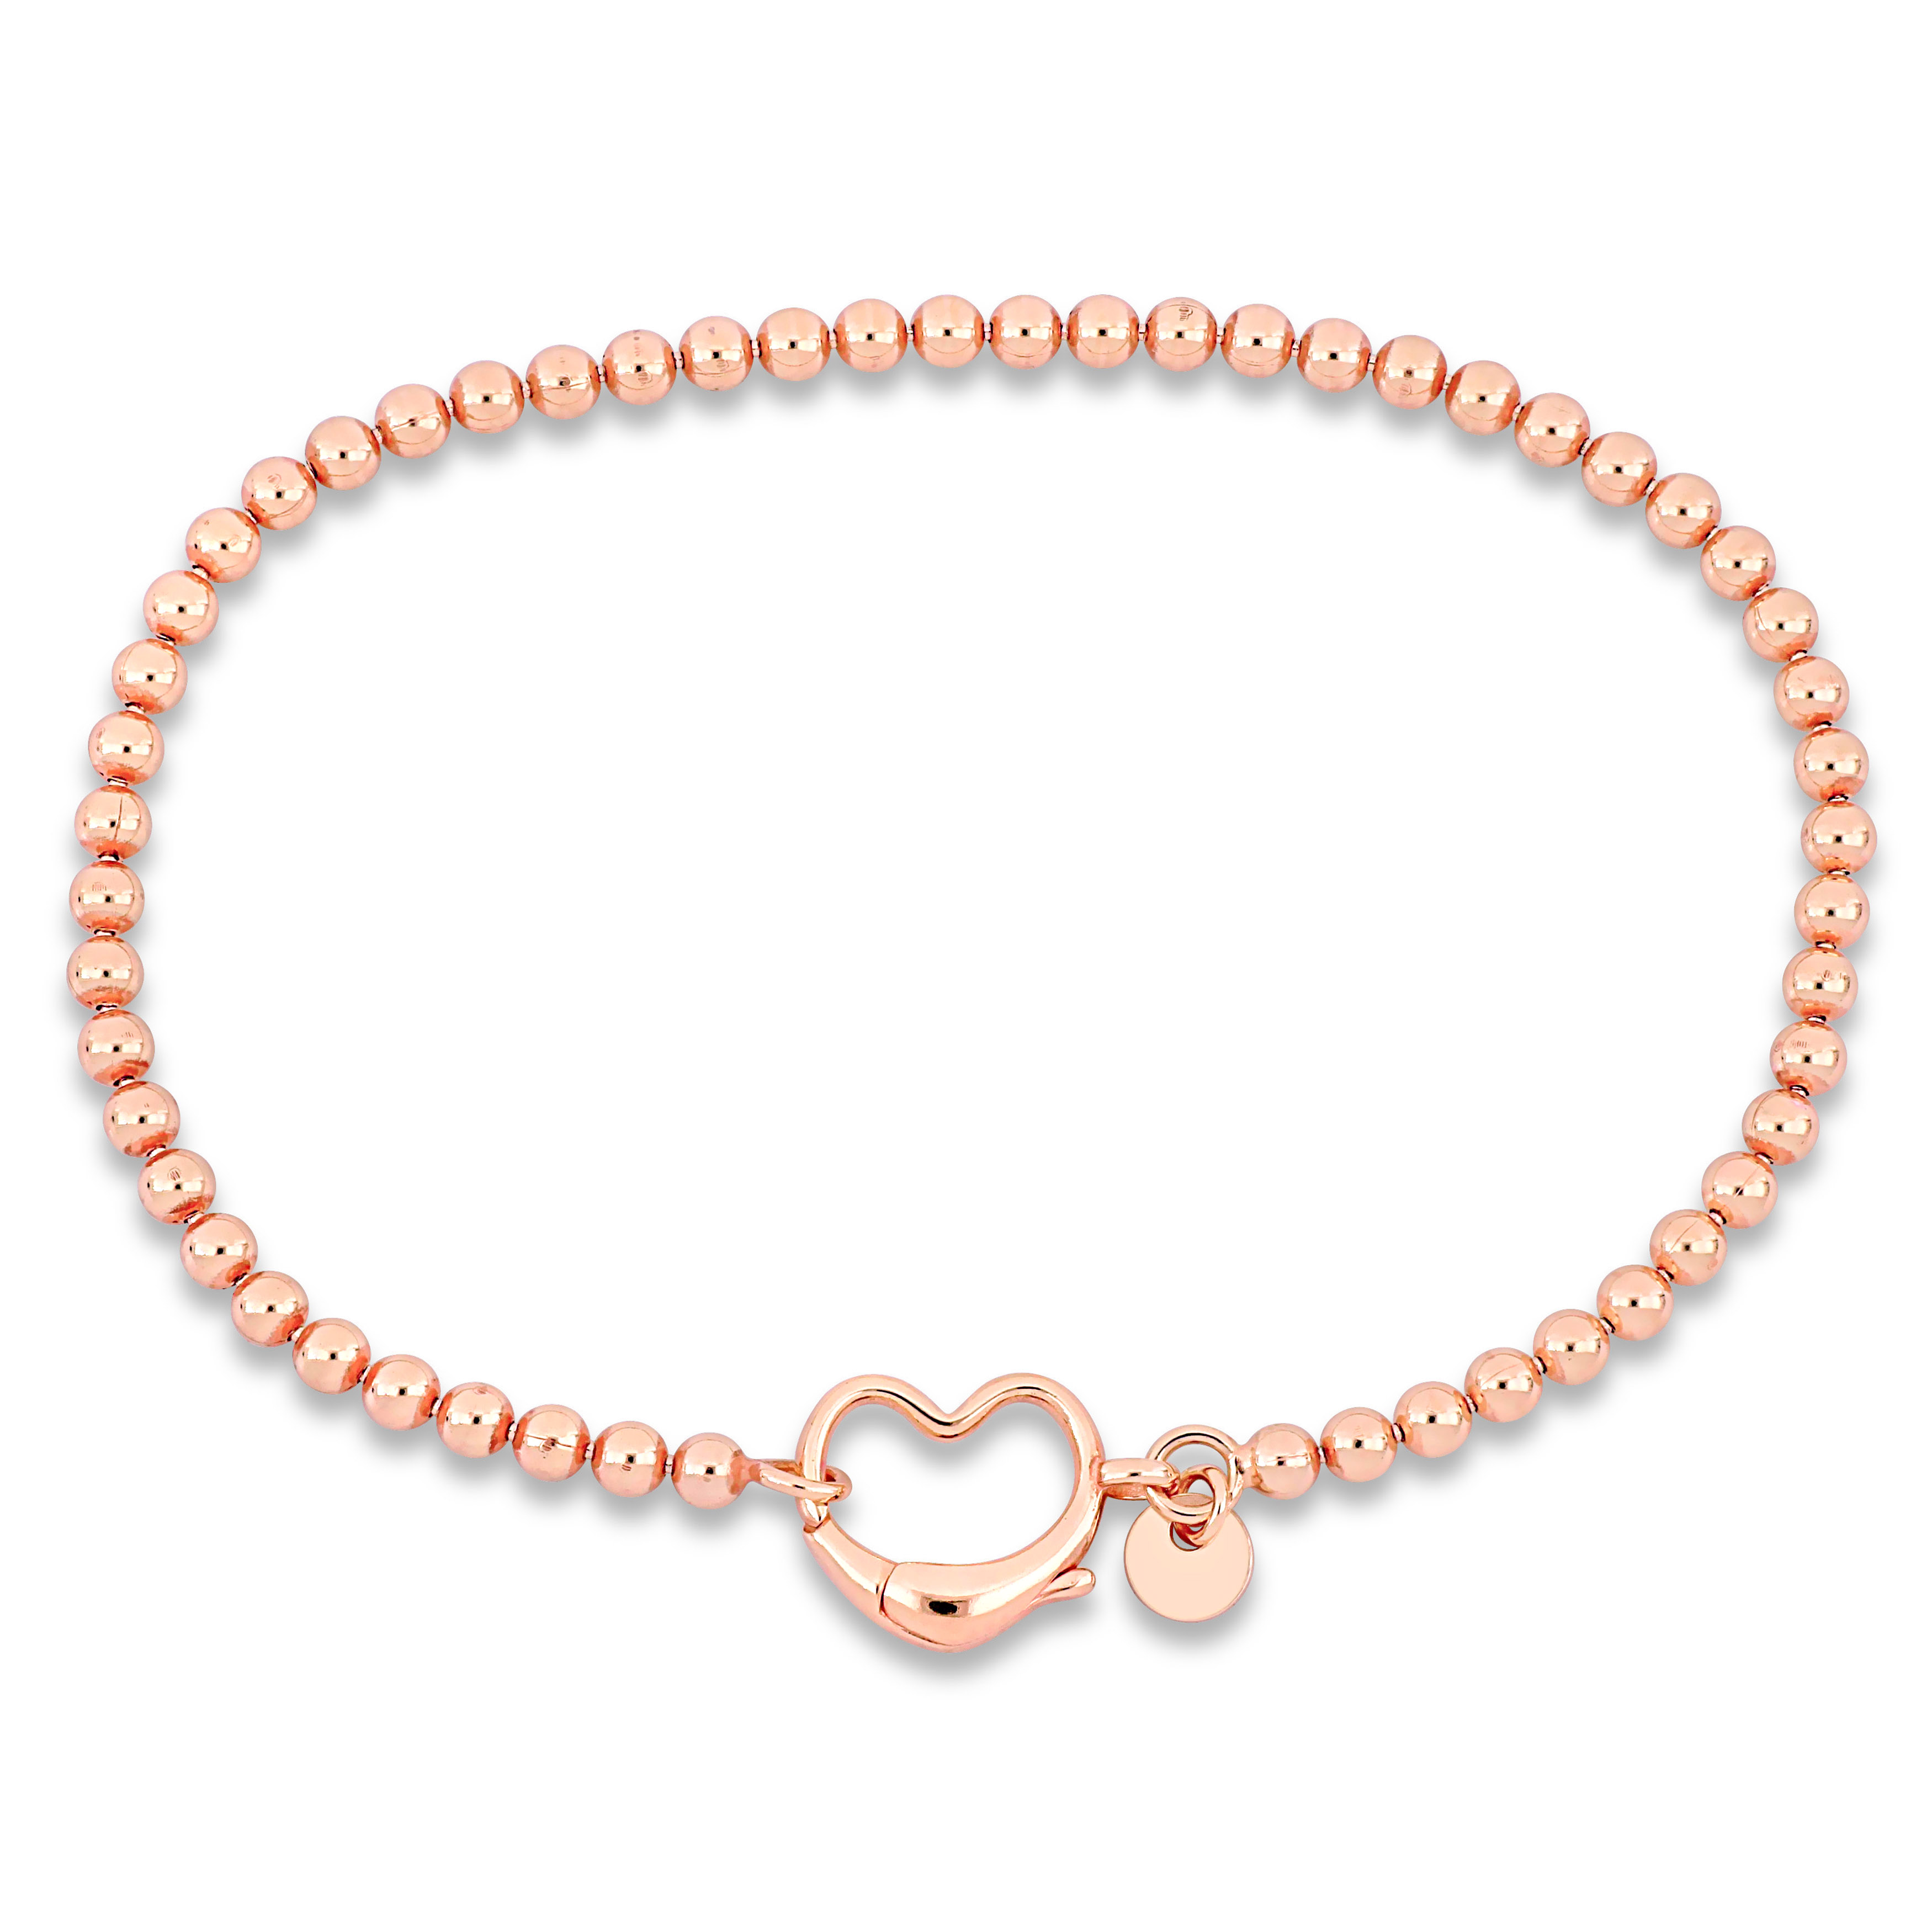 Pink bead link Bracelet with Heart Clasp in Rose Plated Sterling Silver - 7.5 in.